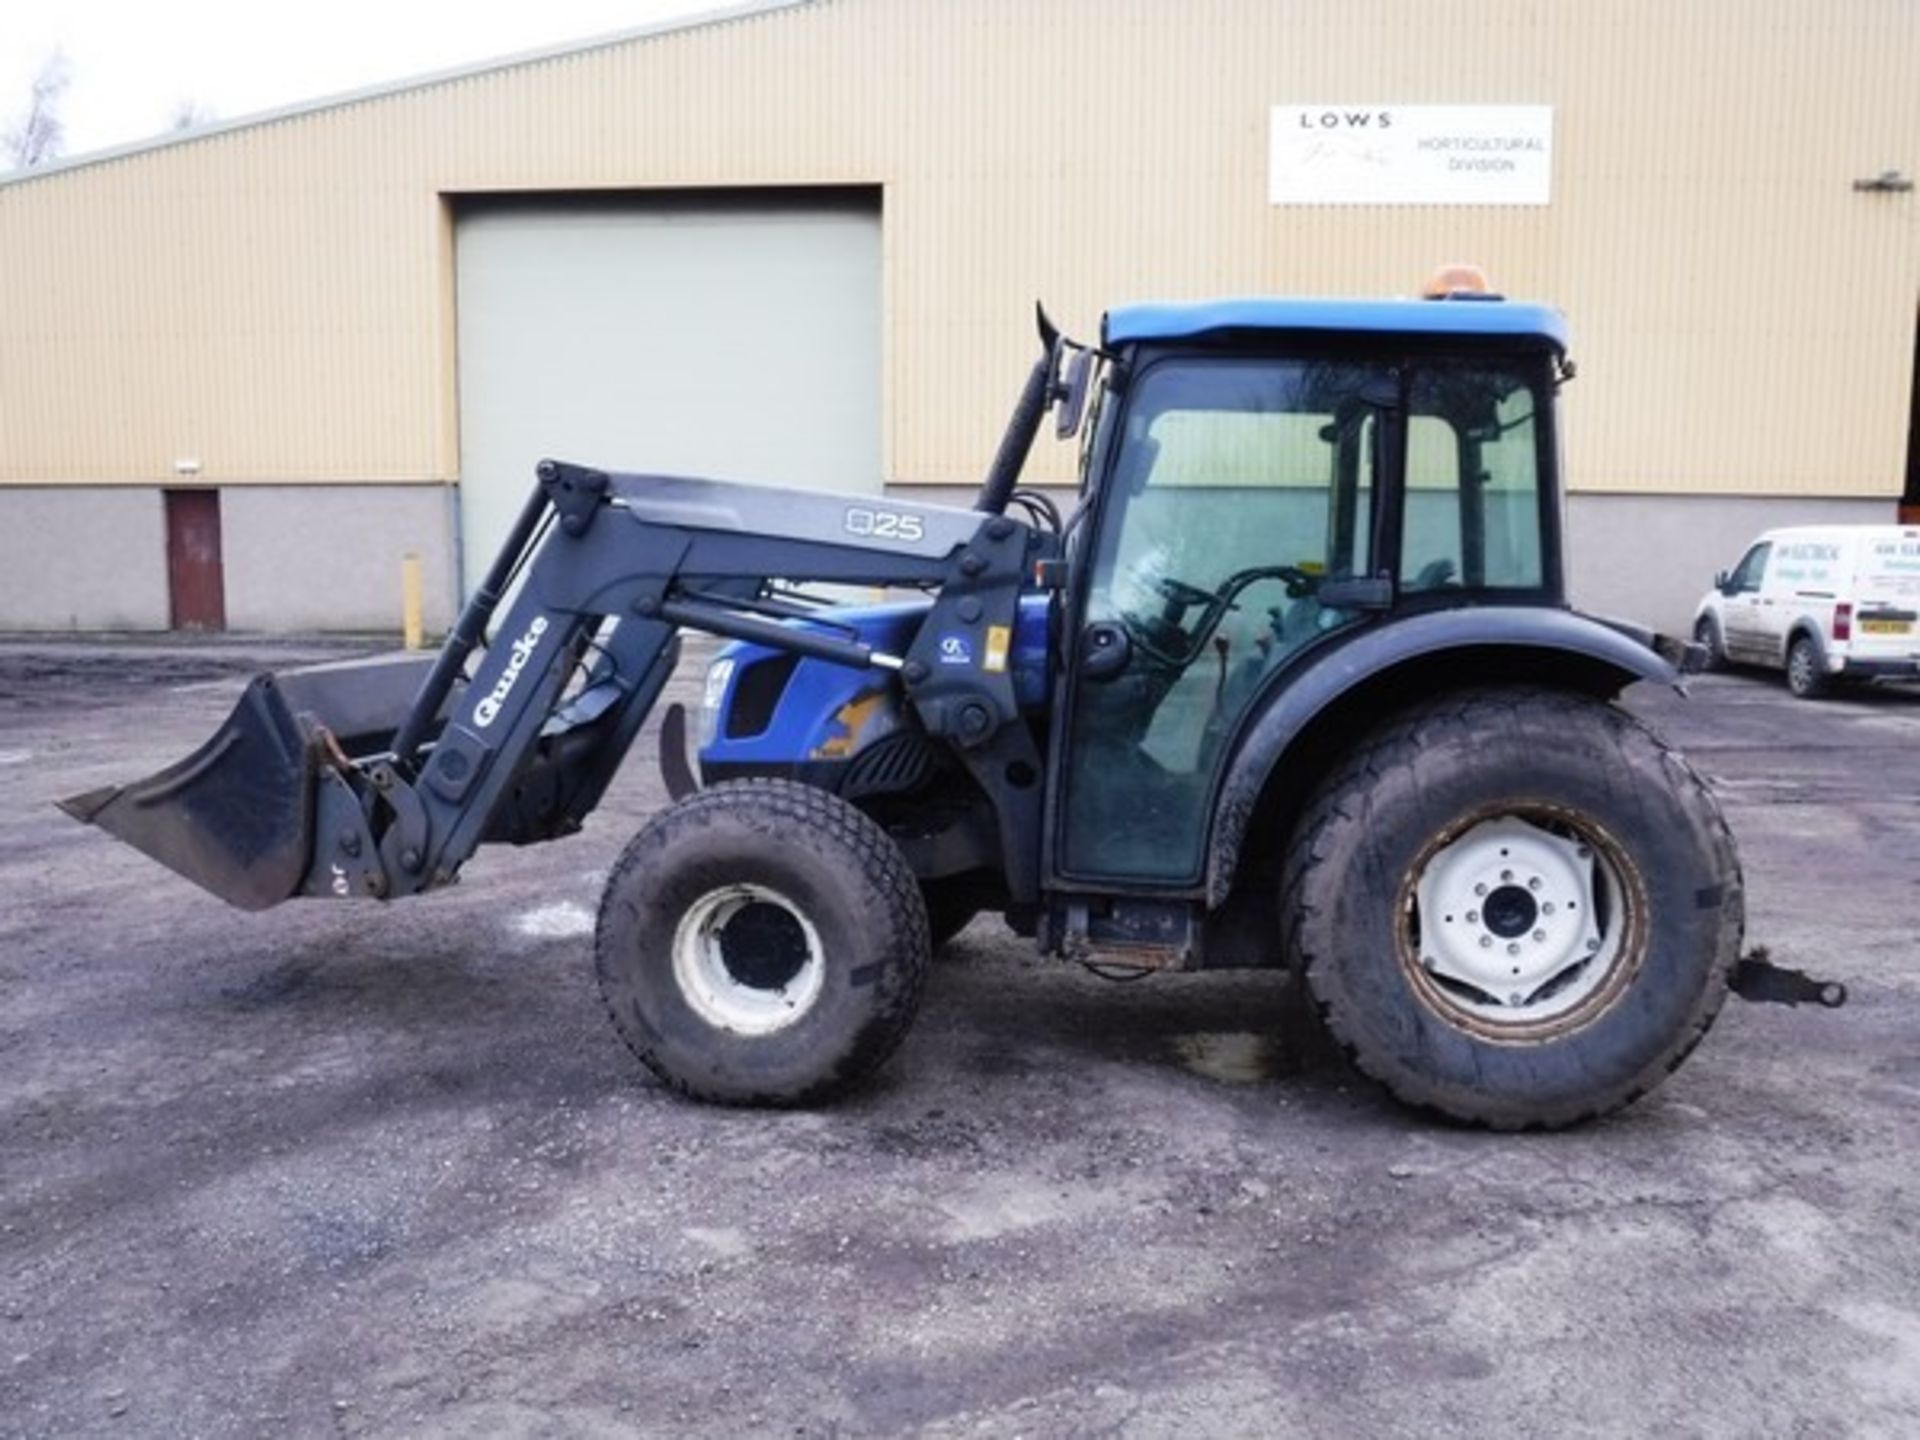 2008 NEW HOLLAND TN60 TRACTOR. REG NO SP08 DWY. SN 111054. GVW(TONNES) 4497, 3062HRS (NOT VERIFIED) - Image 7 of 40